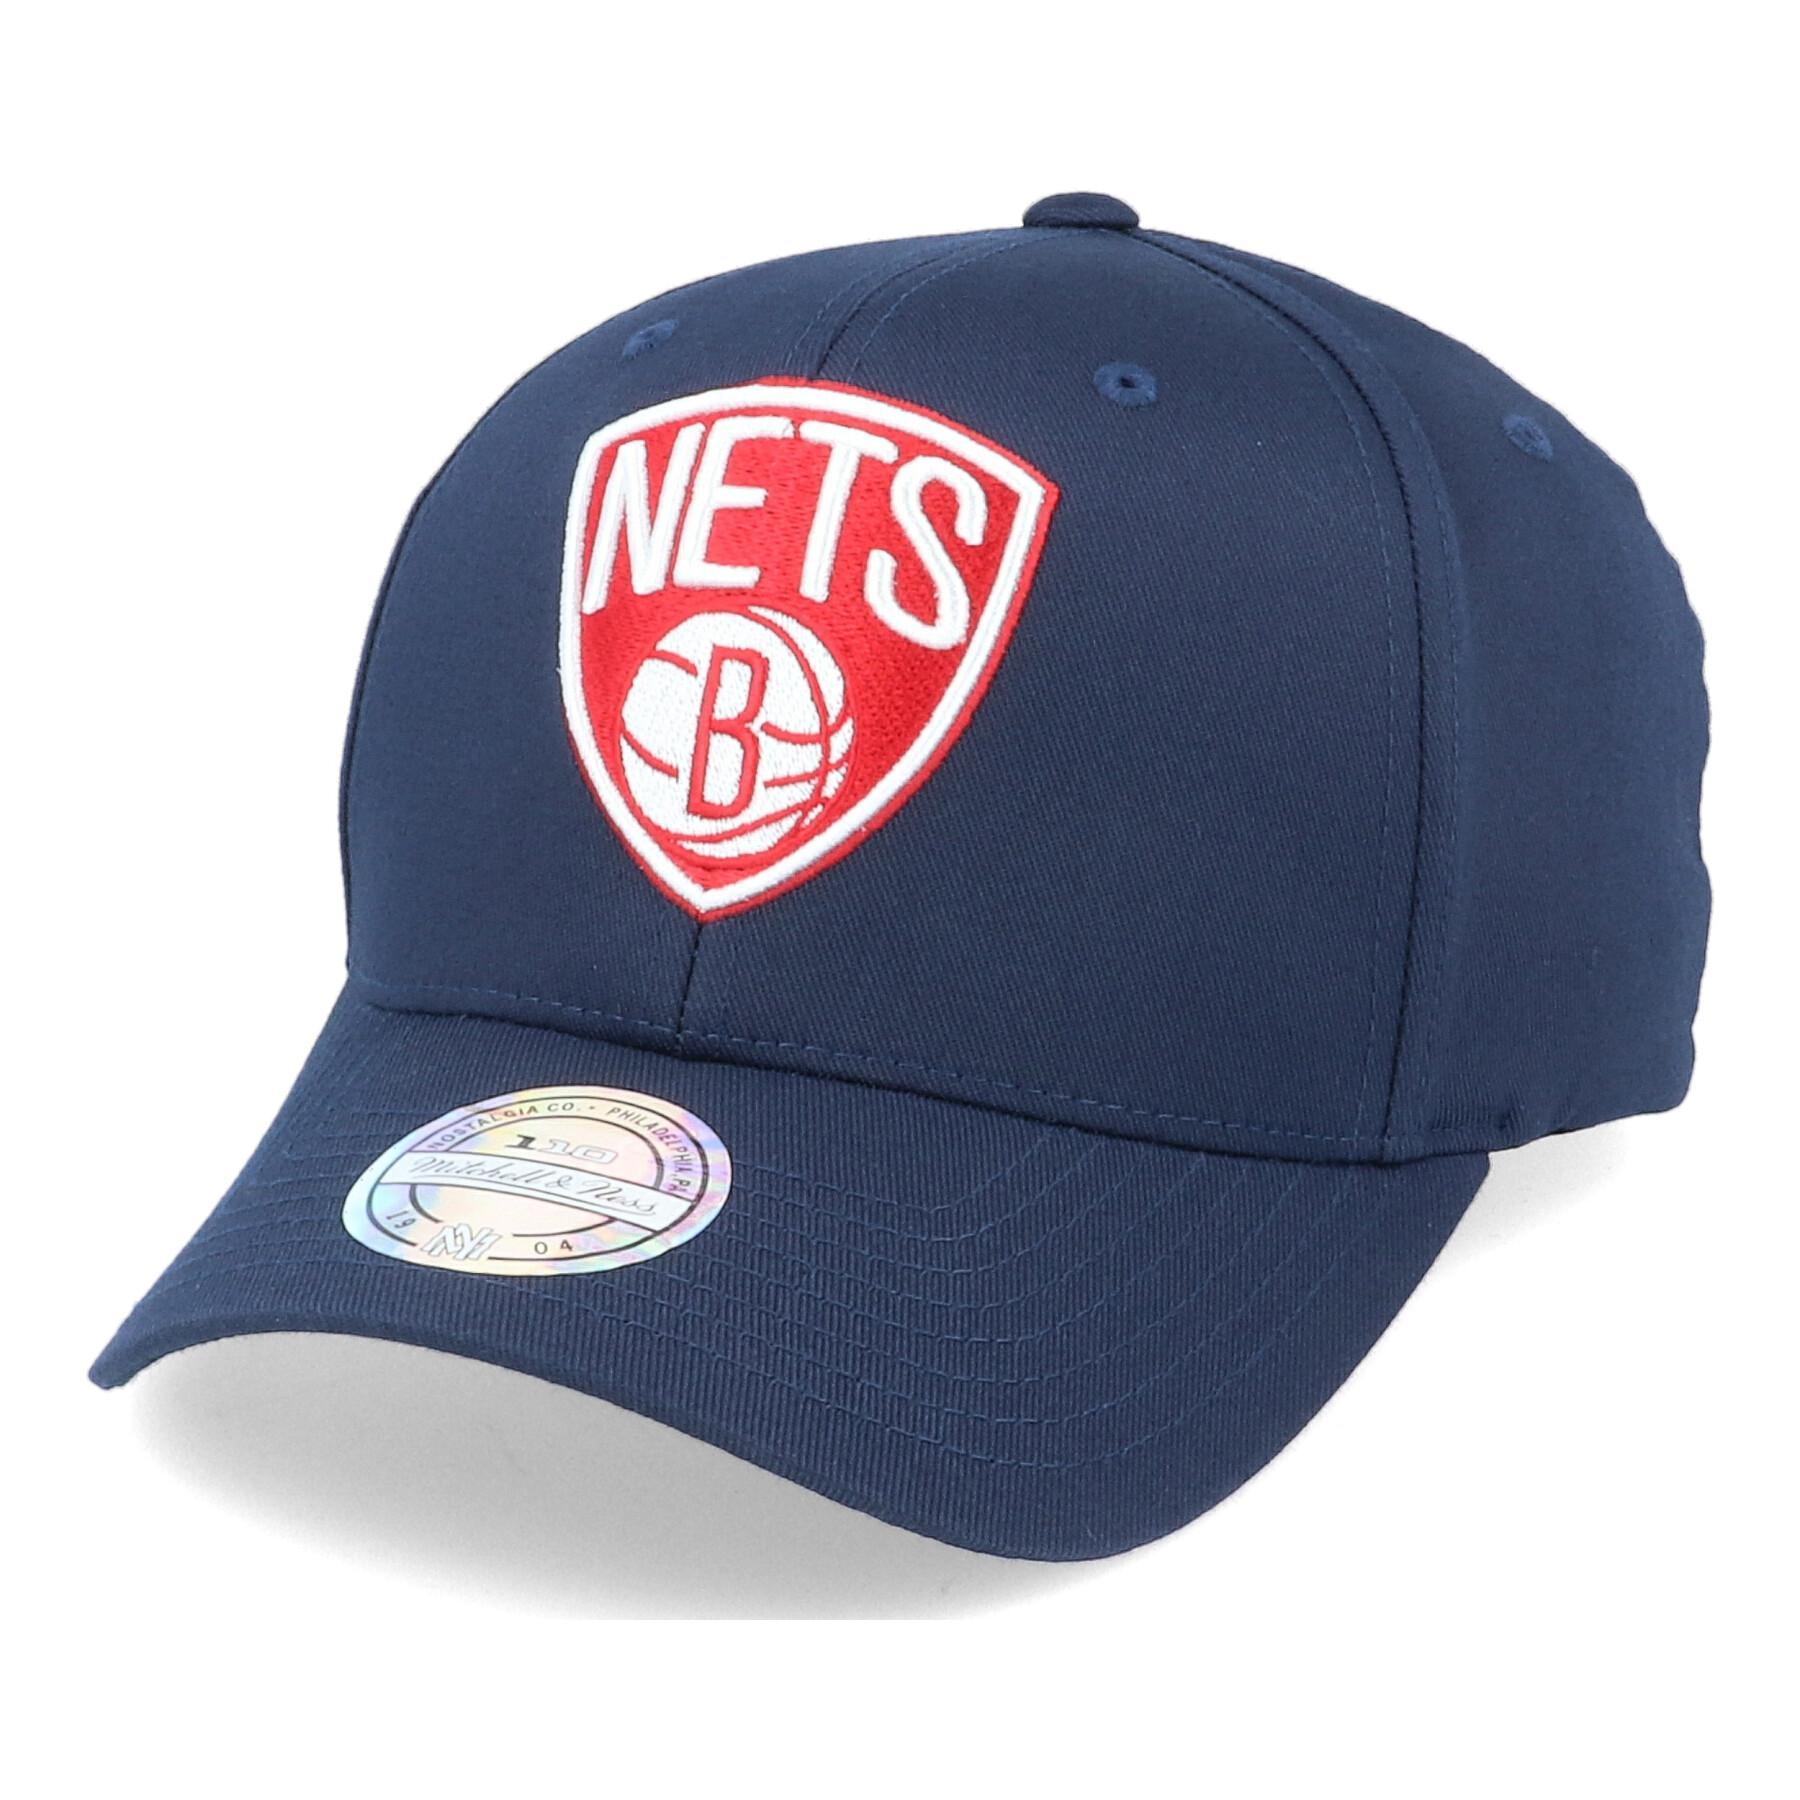 Kappe Brooklyn Nets navy/red/white 110